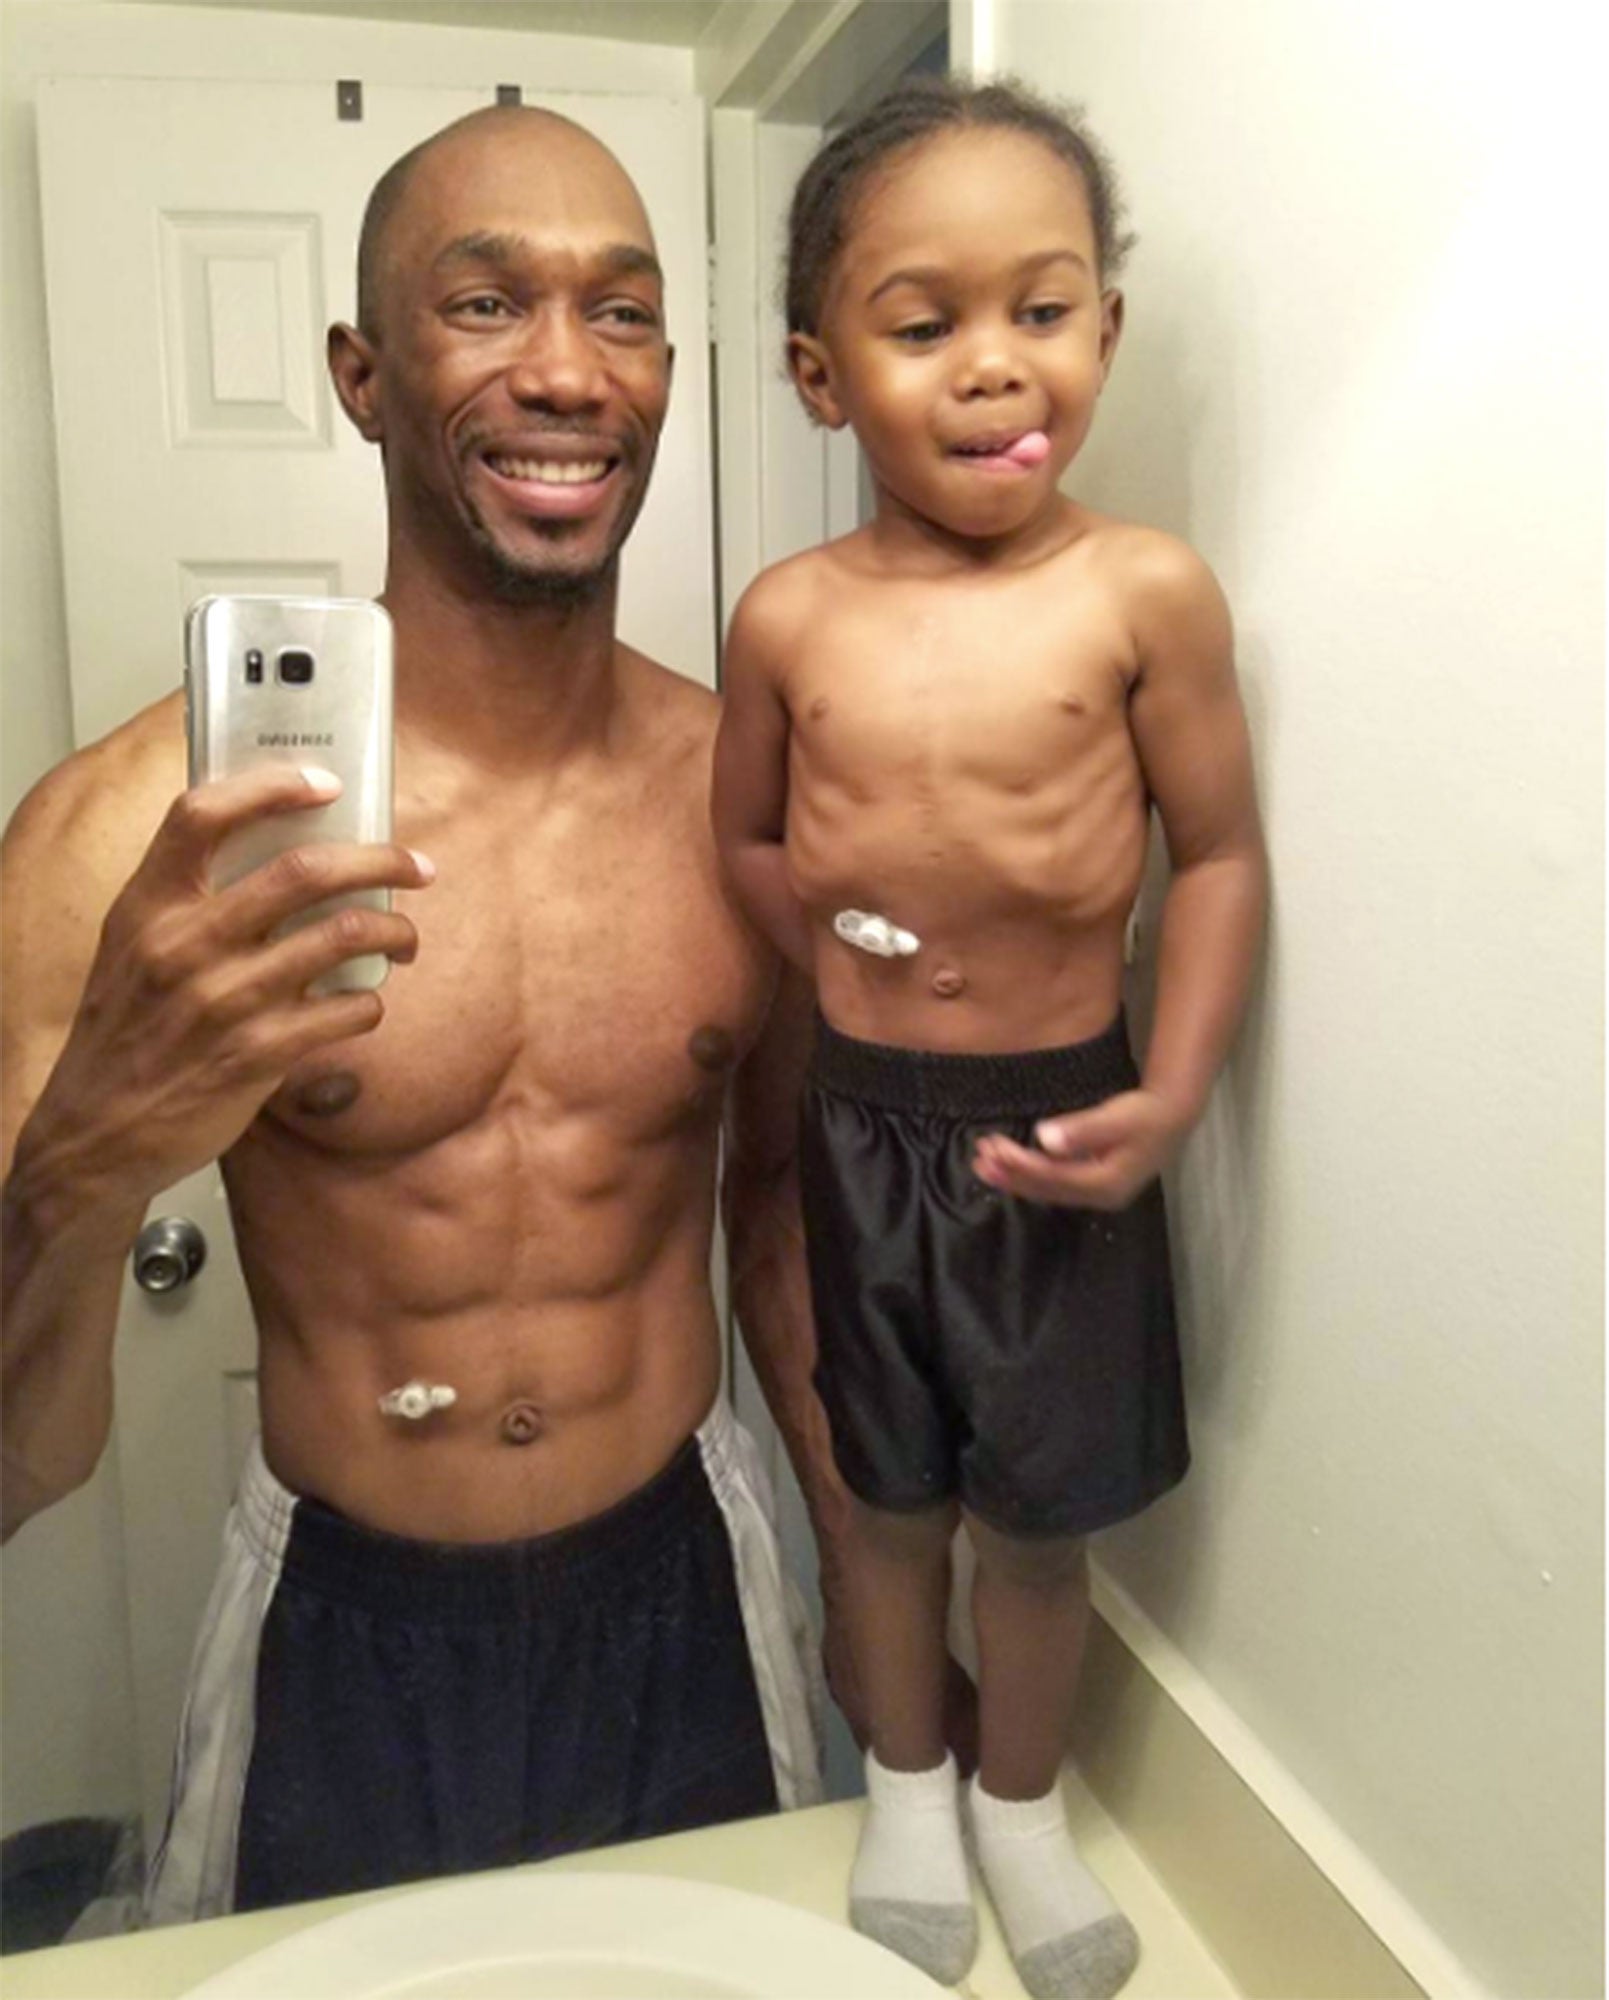 Virginia Dad Posts Sweetest Selfie with Son Who Has Feeding Tube: ‘He’s Not Alone’